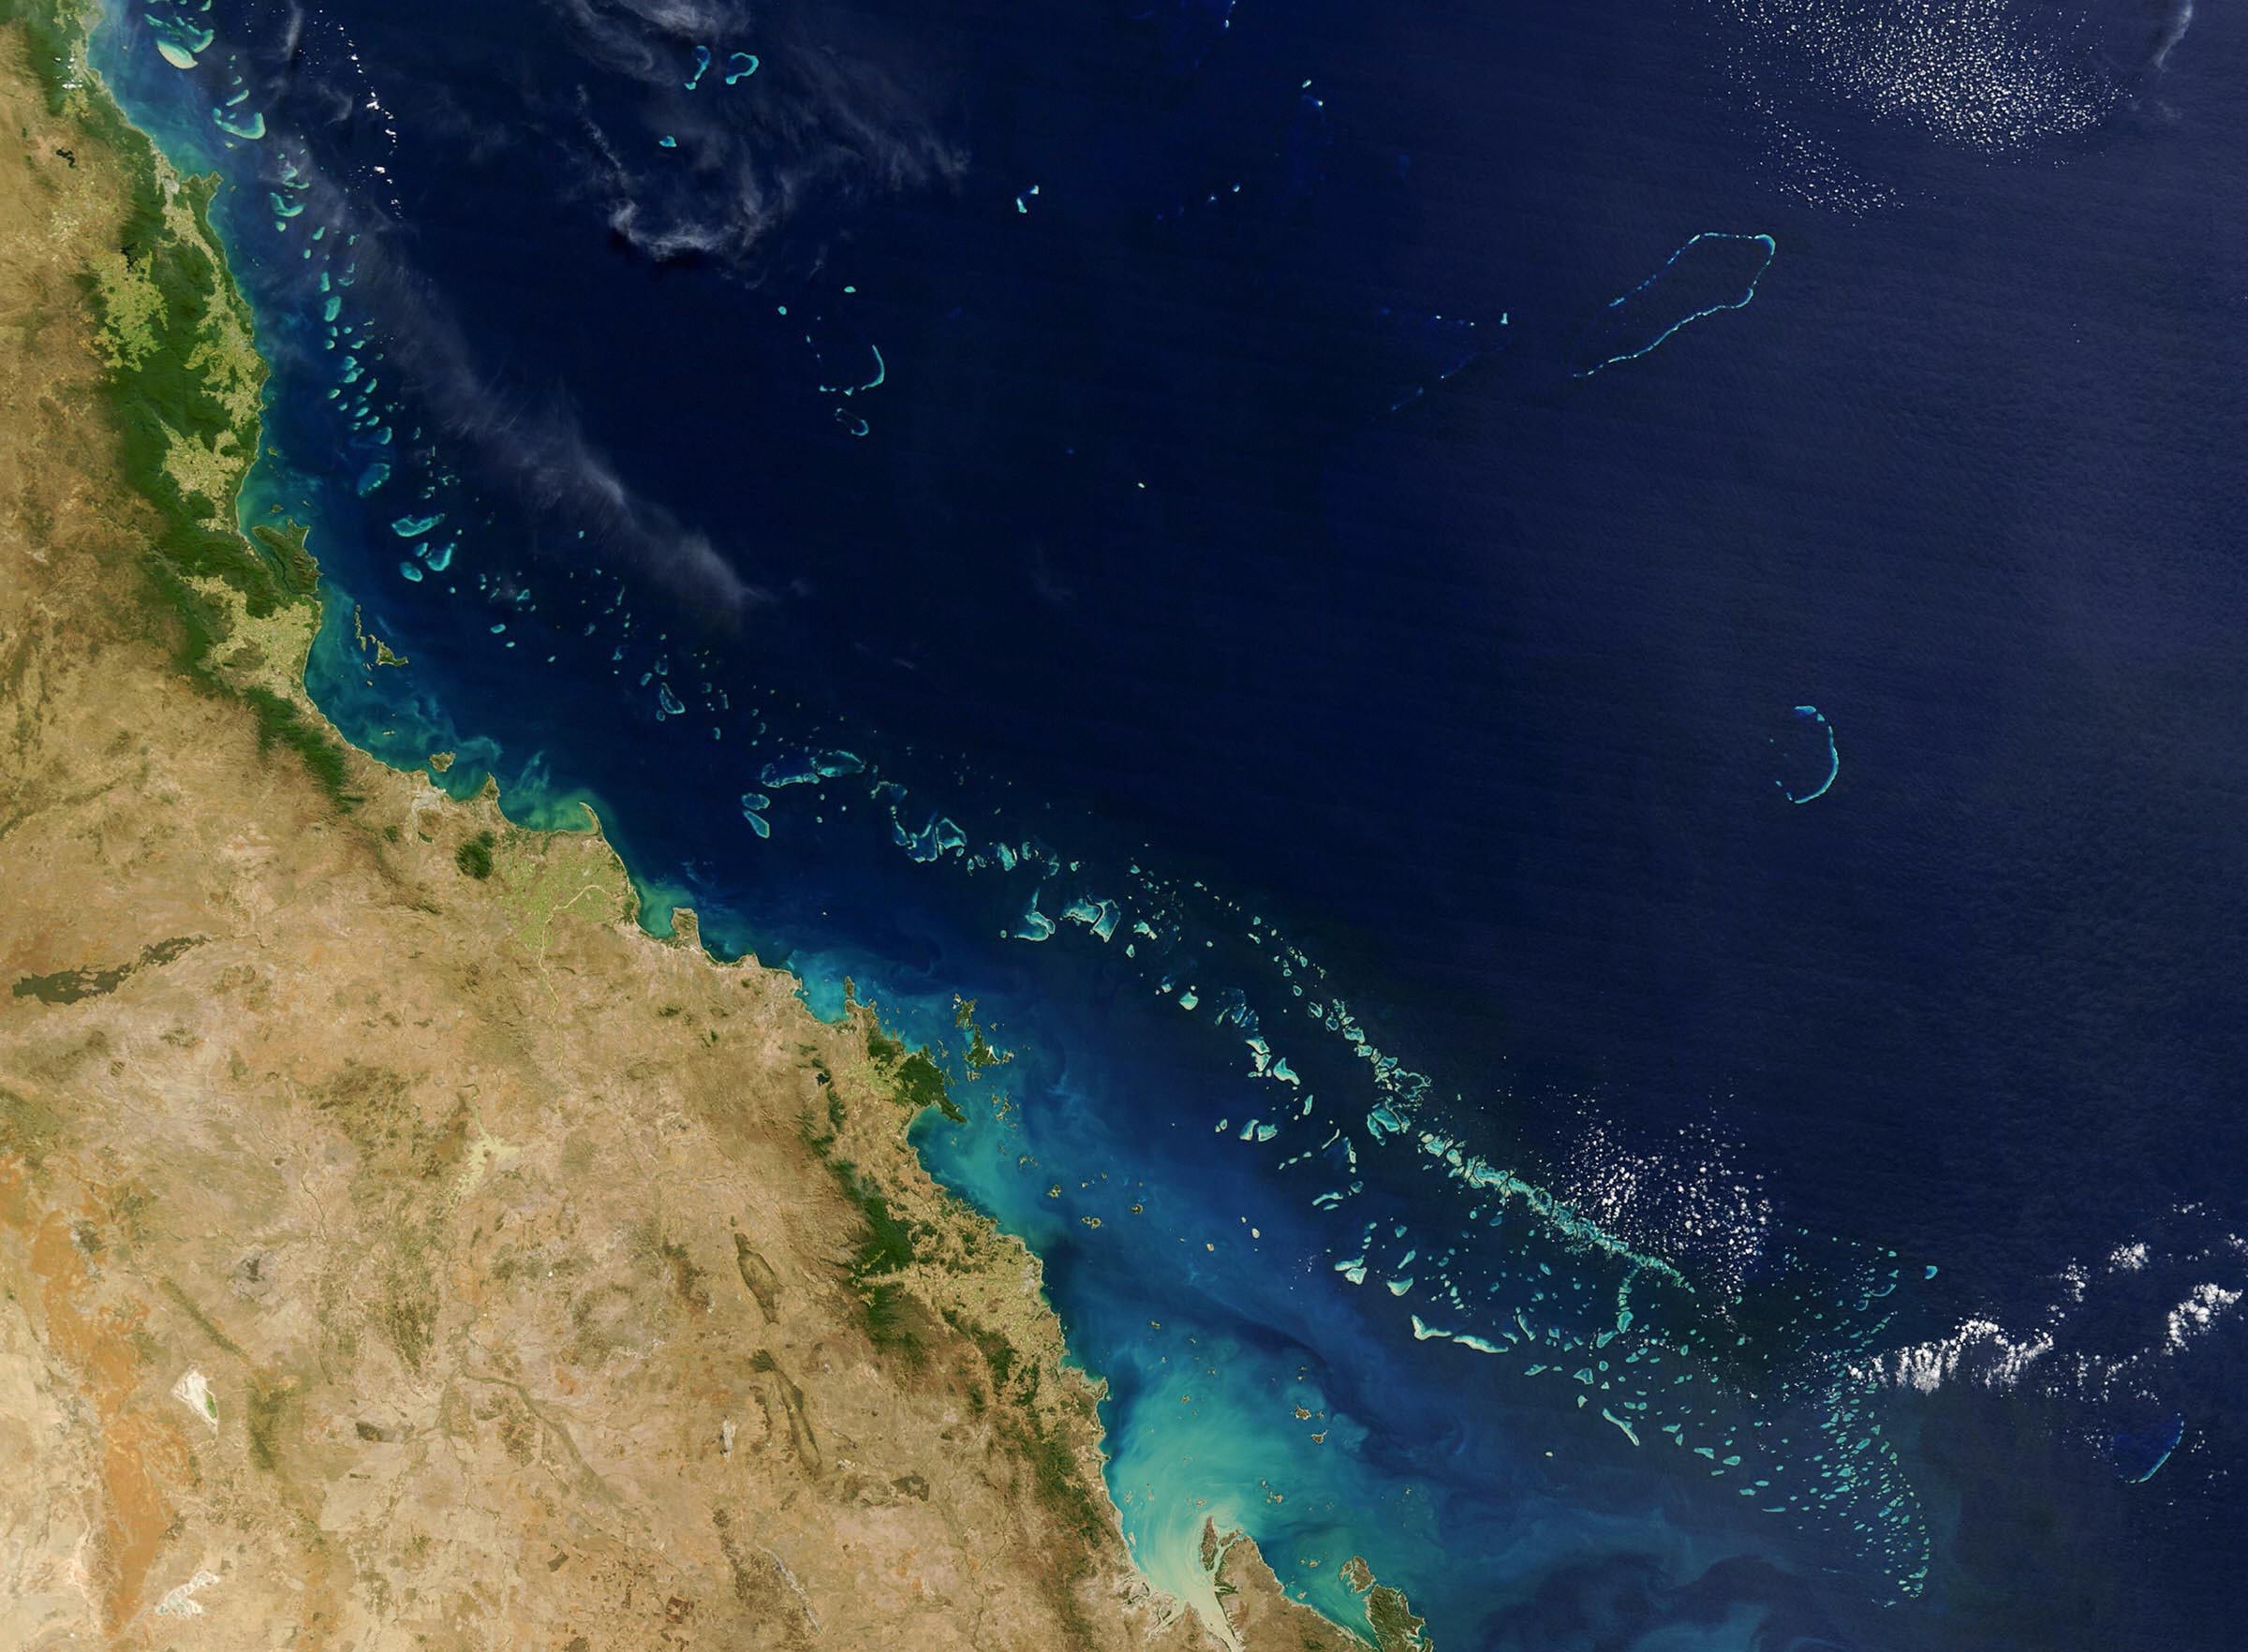 Stretching along more than 2,000 km (1,200 miles) of Australia’s eastern coast is one of the world’s formost natural wonders - The Great Barrier Reef (Light blue) seen here in this 06 August, 2004 NASA satellite image.